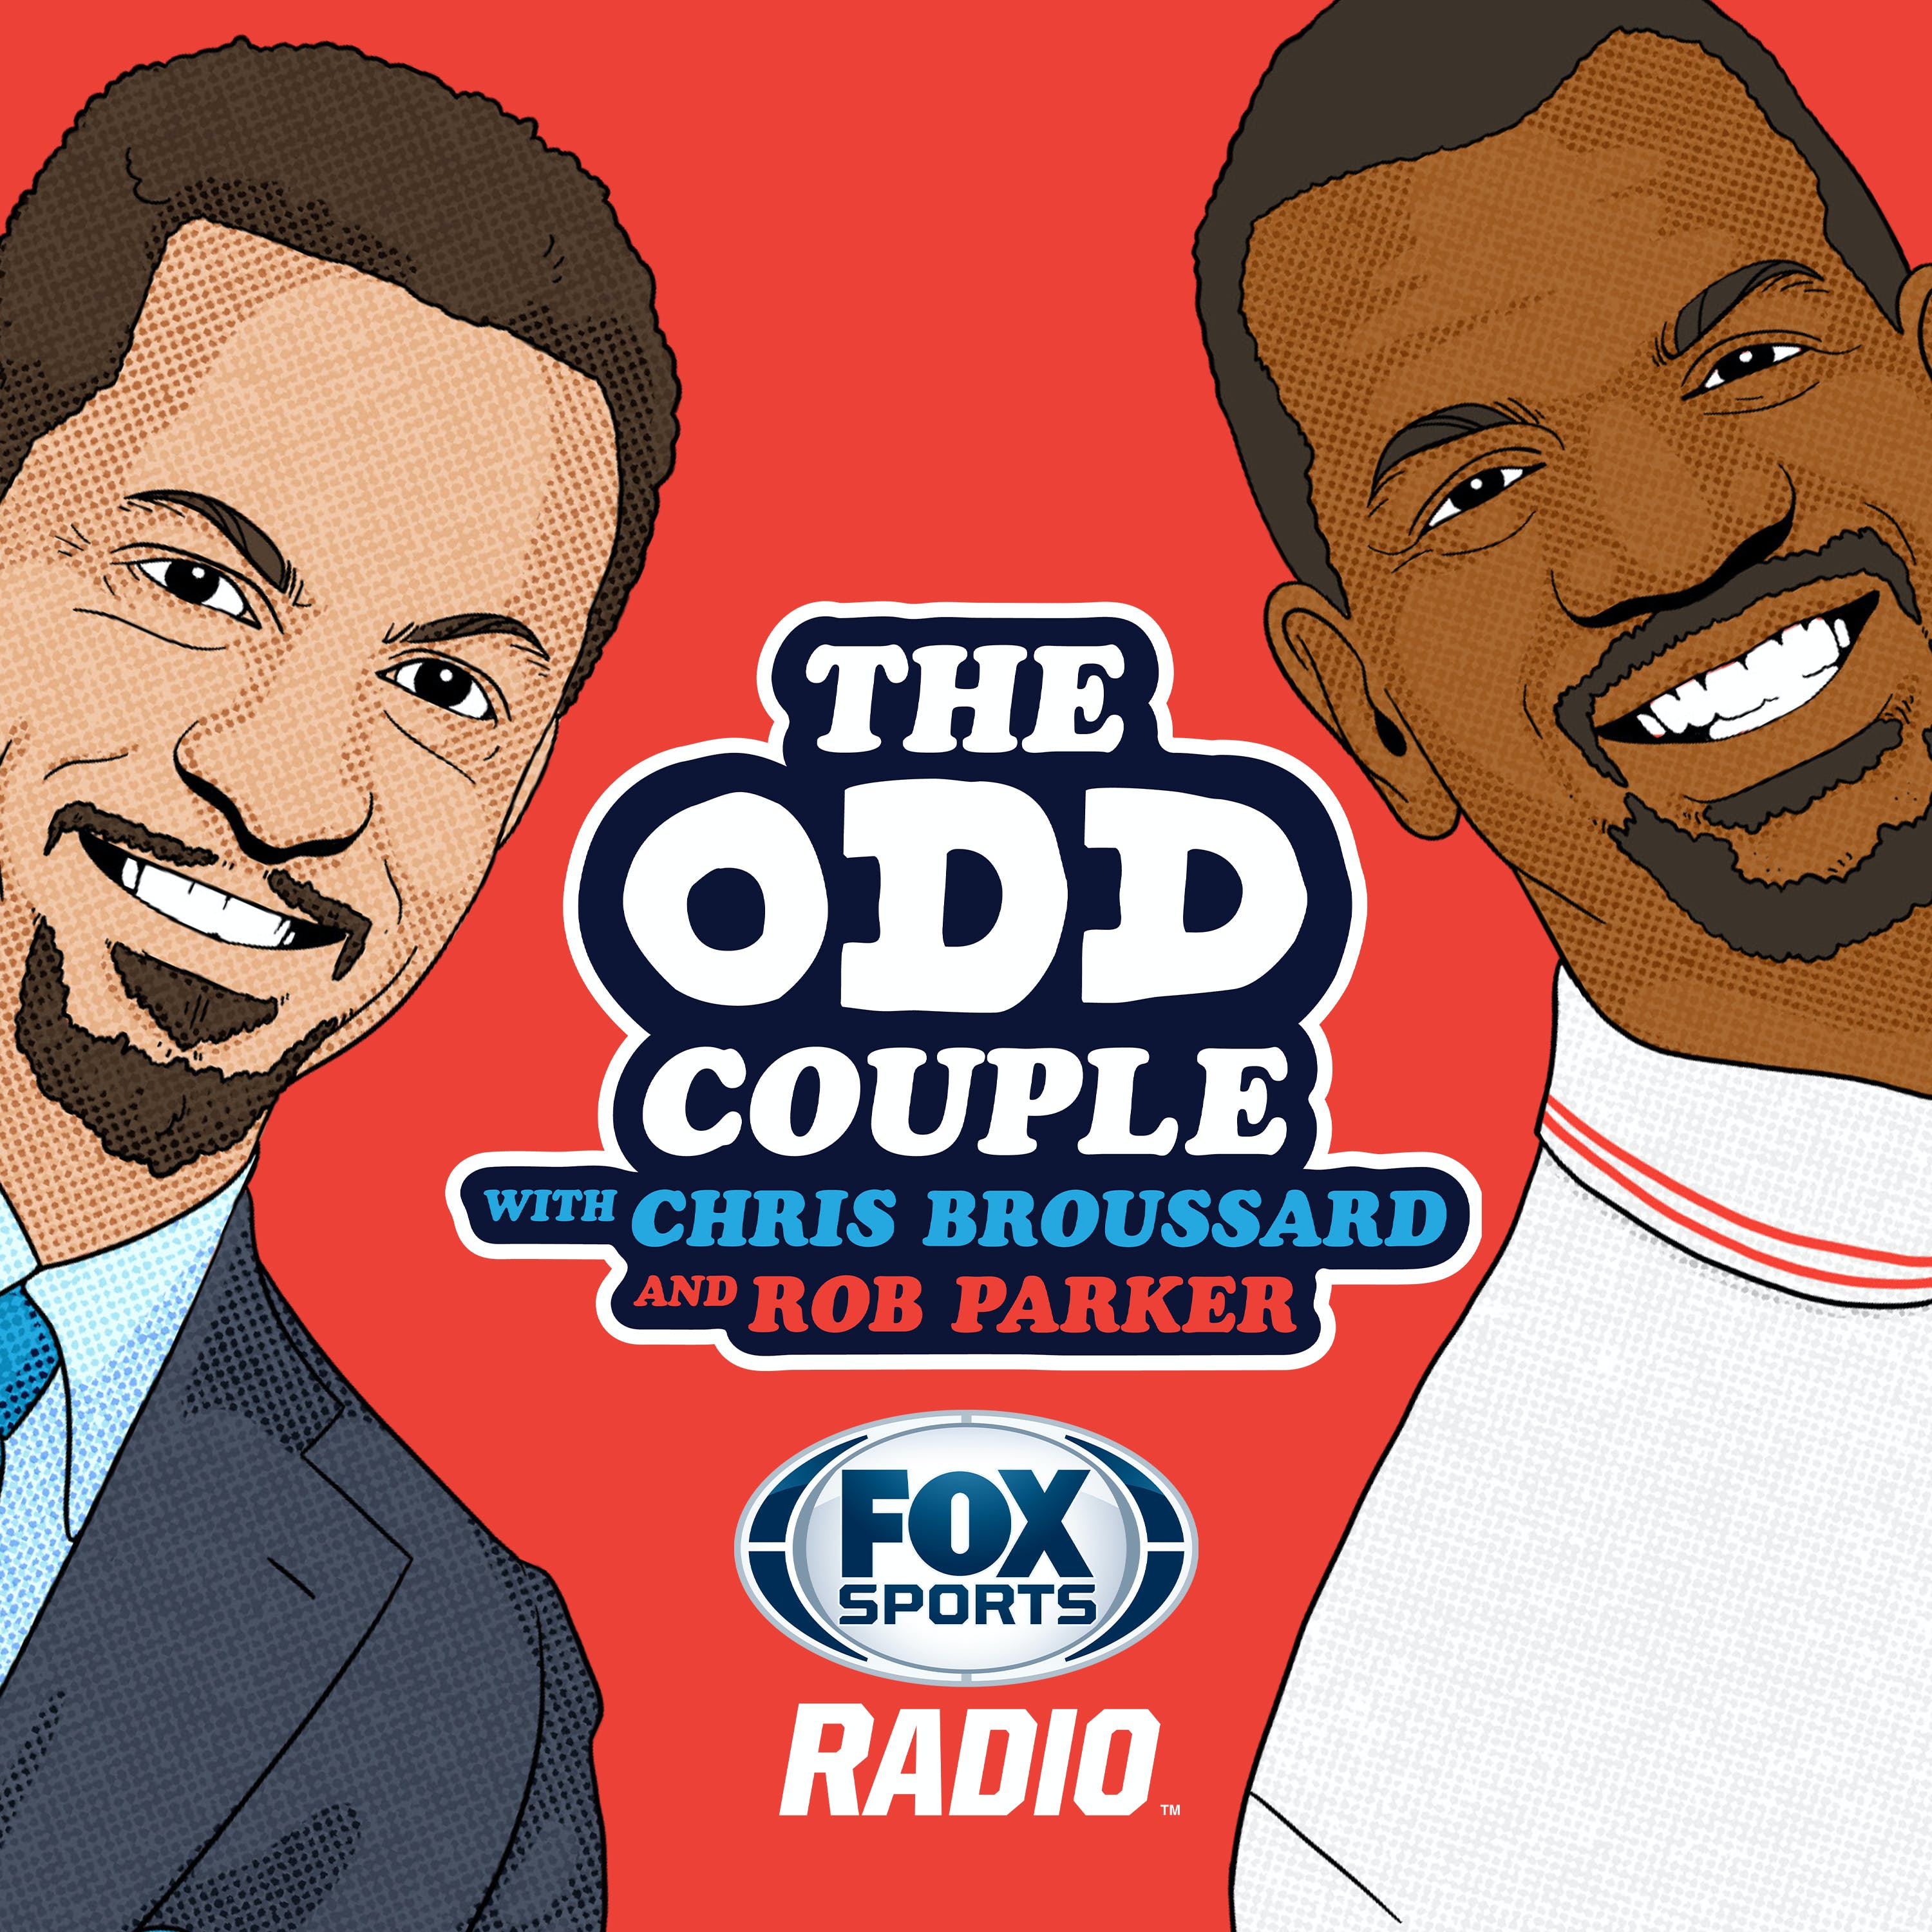 11/25/2021 - Best of The Odd Couple